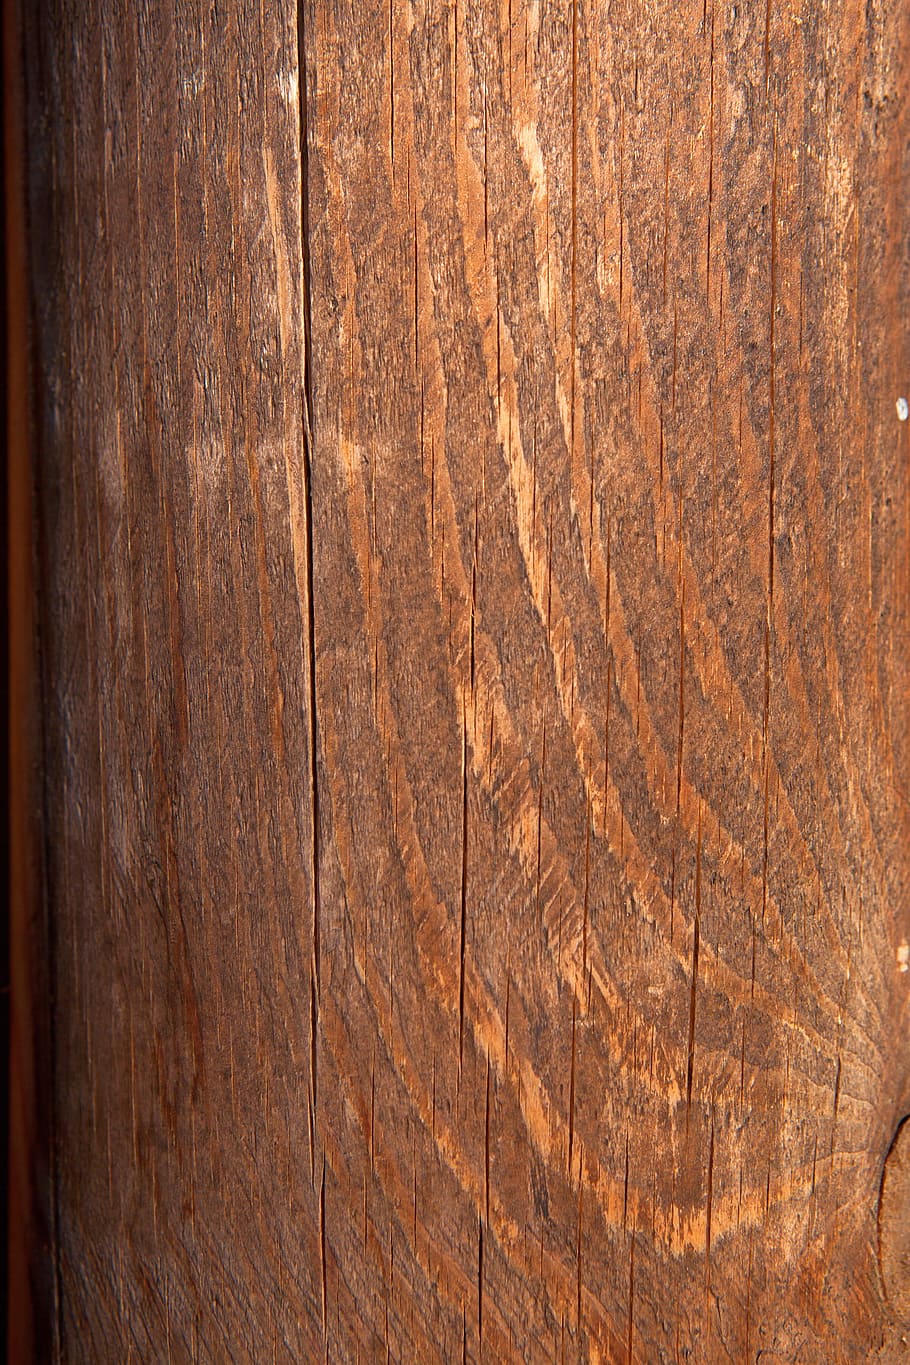 background, blank, board, brown, close-up, flat, hardwood, material, old, plank